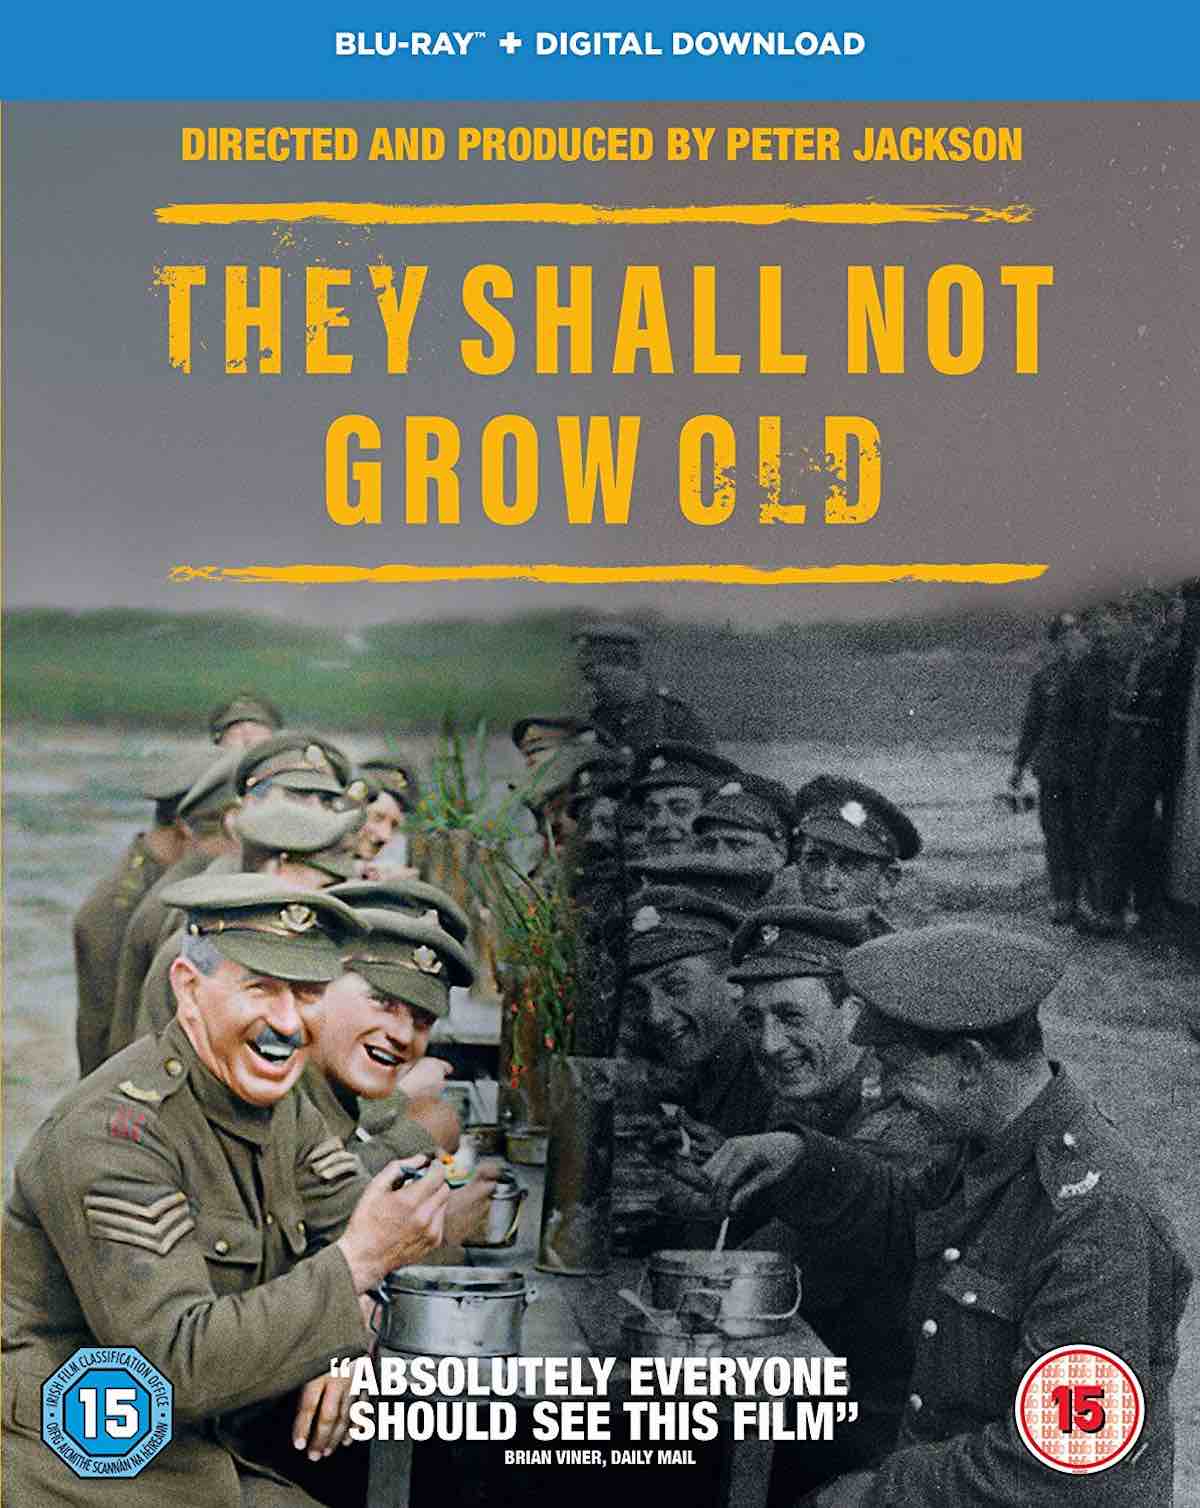 peter-jackson-s-they-shall-not-grow-old-is-now-available-to-pre-order